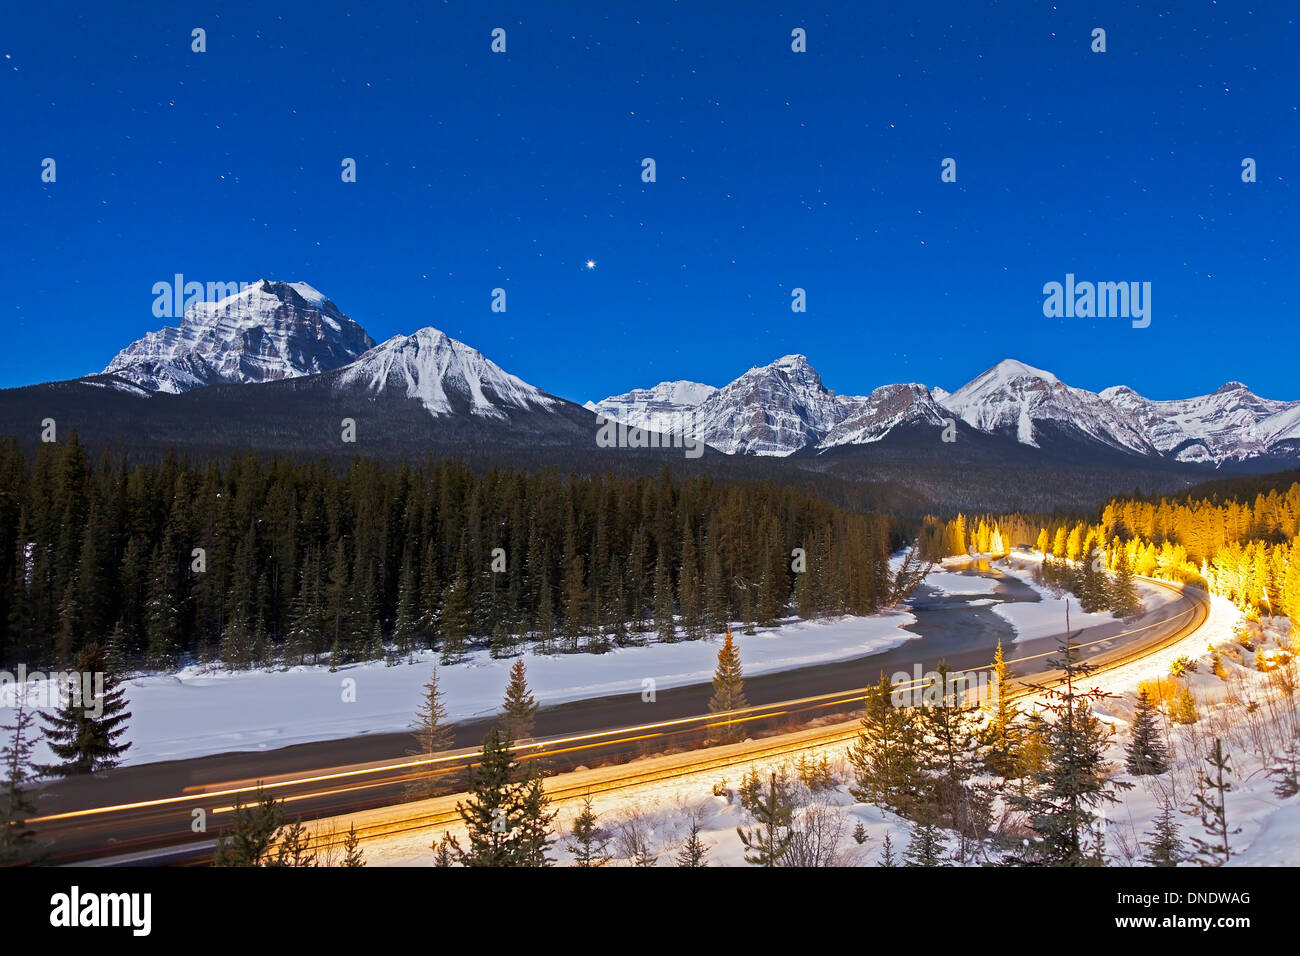 A moonlit nightscape over the Bow River and Morant's Curve in Banff National Park, Canada. Stock Photo